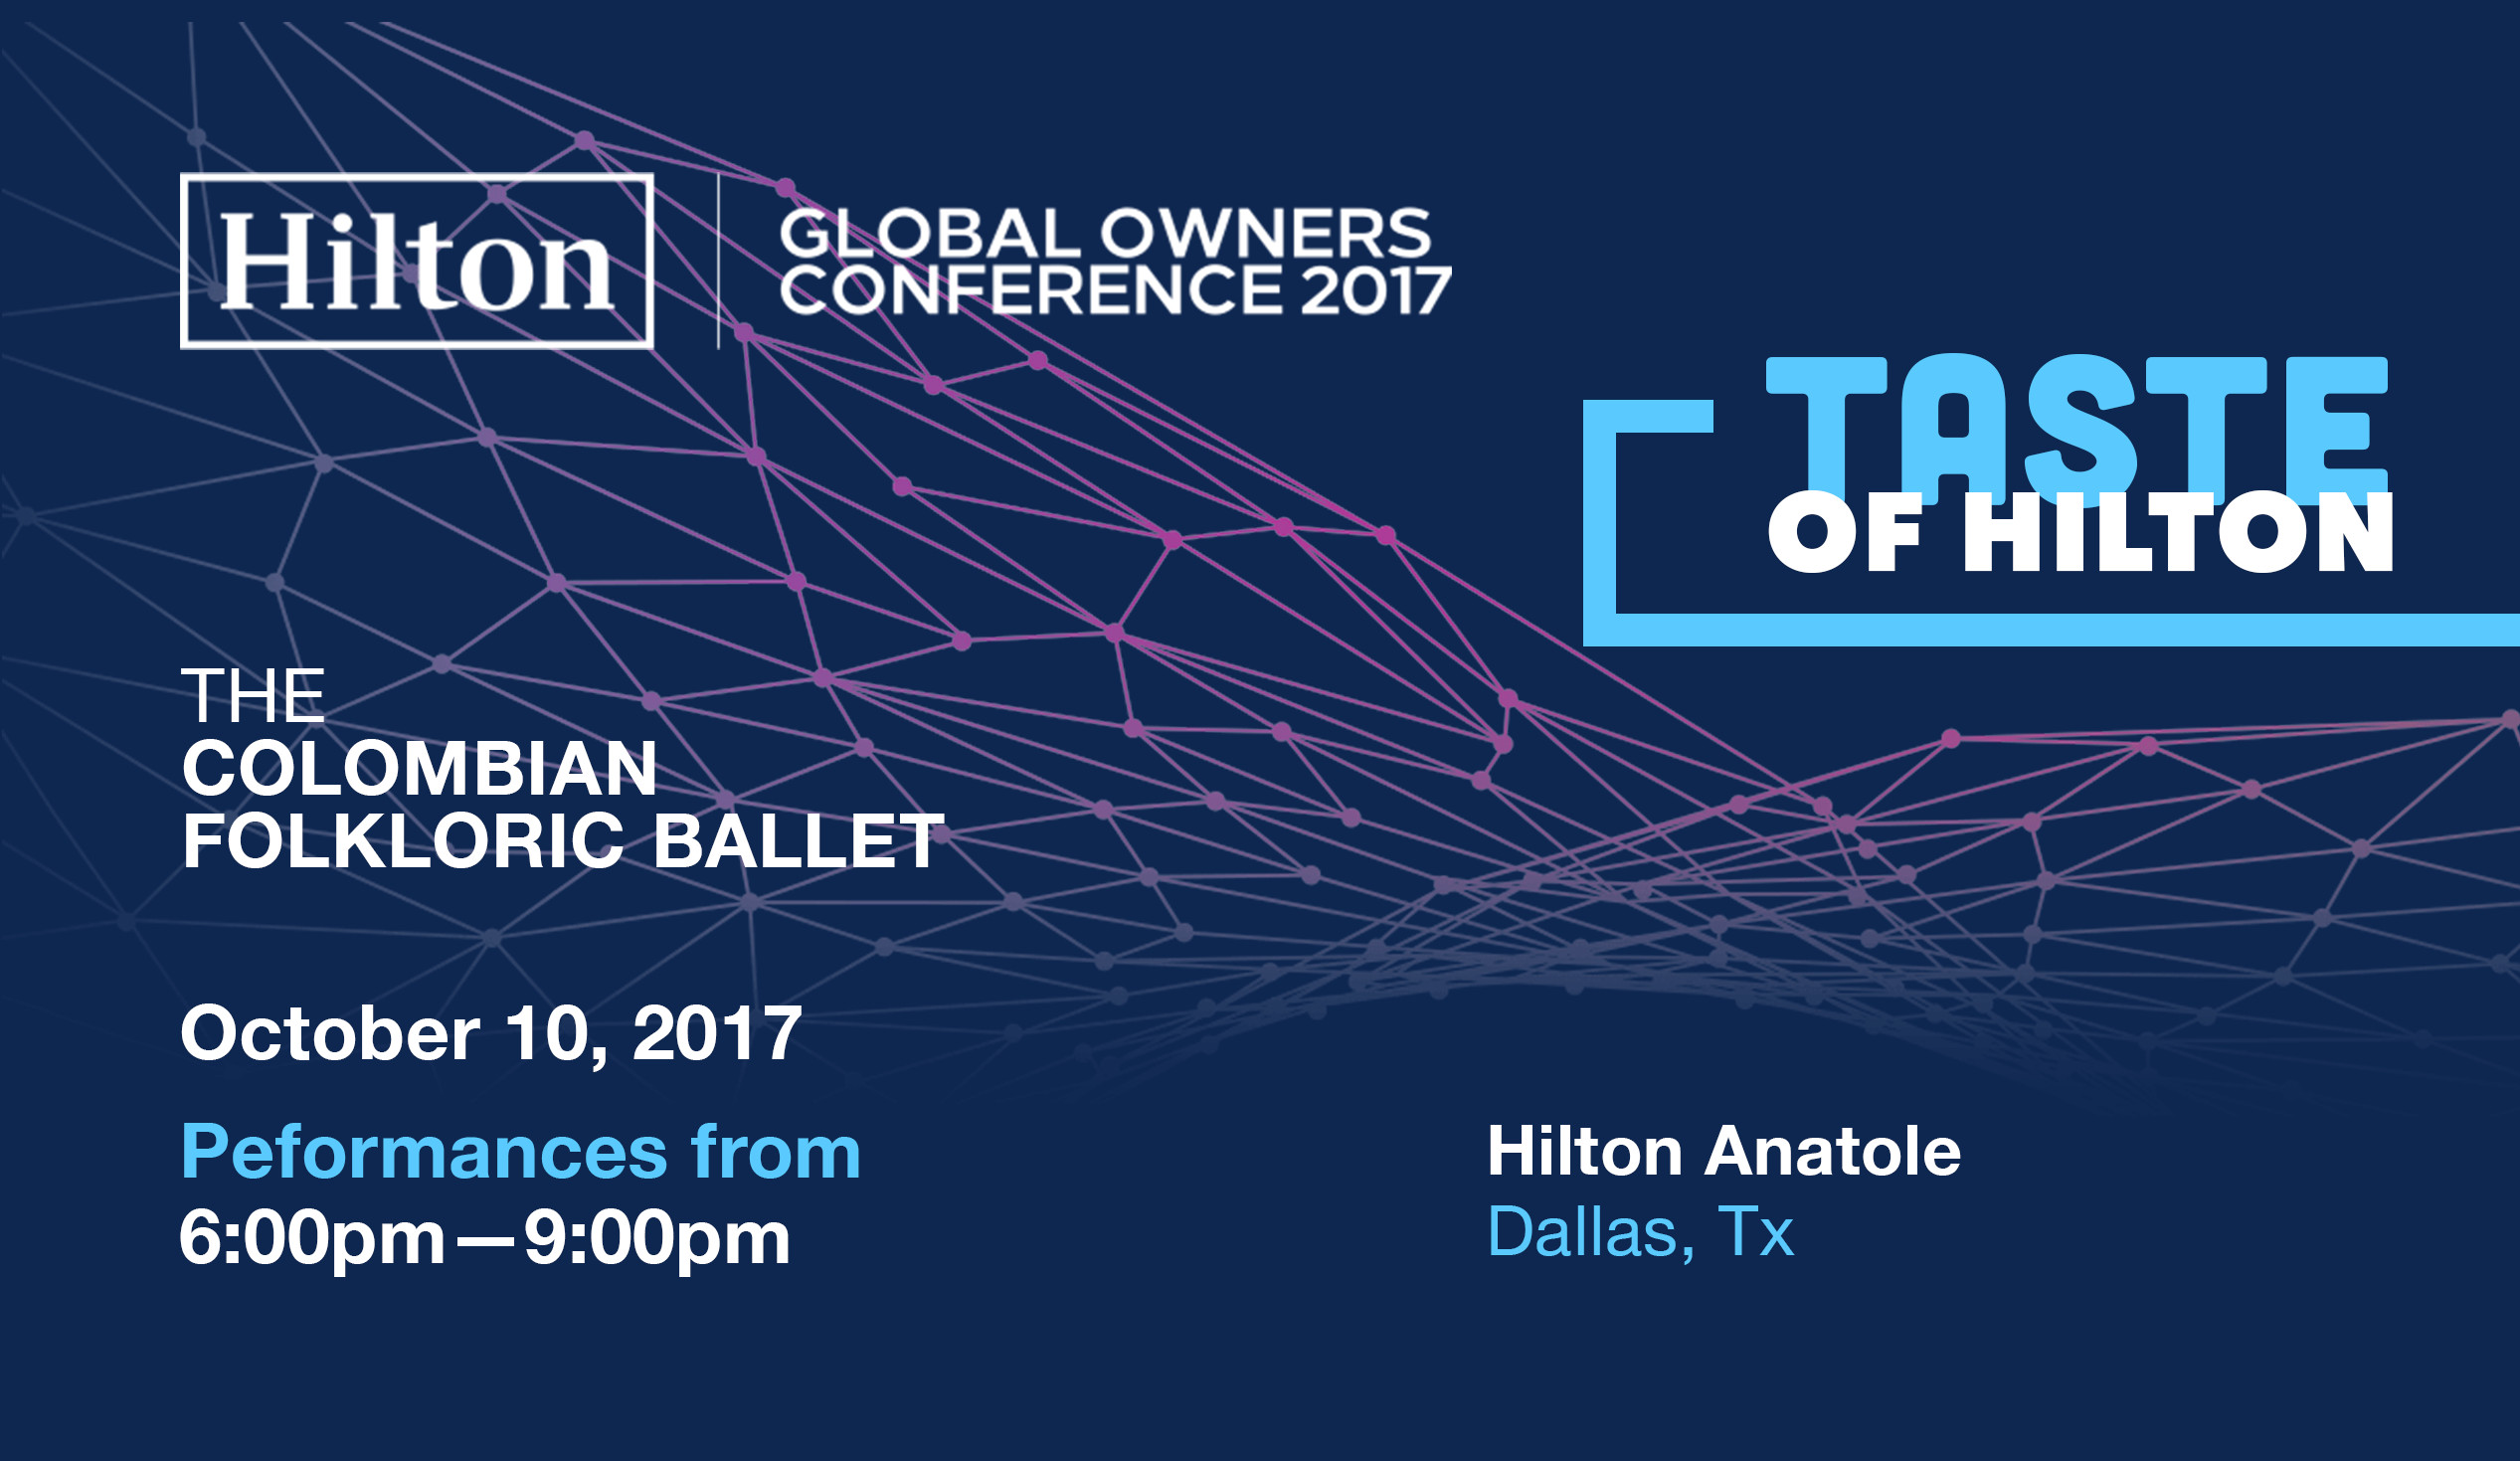 The Colombian Folkloric Ballet—Hilton Global Owners Conference 2017-Taste of Hilton